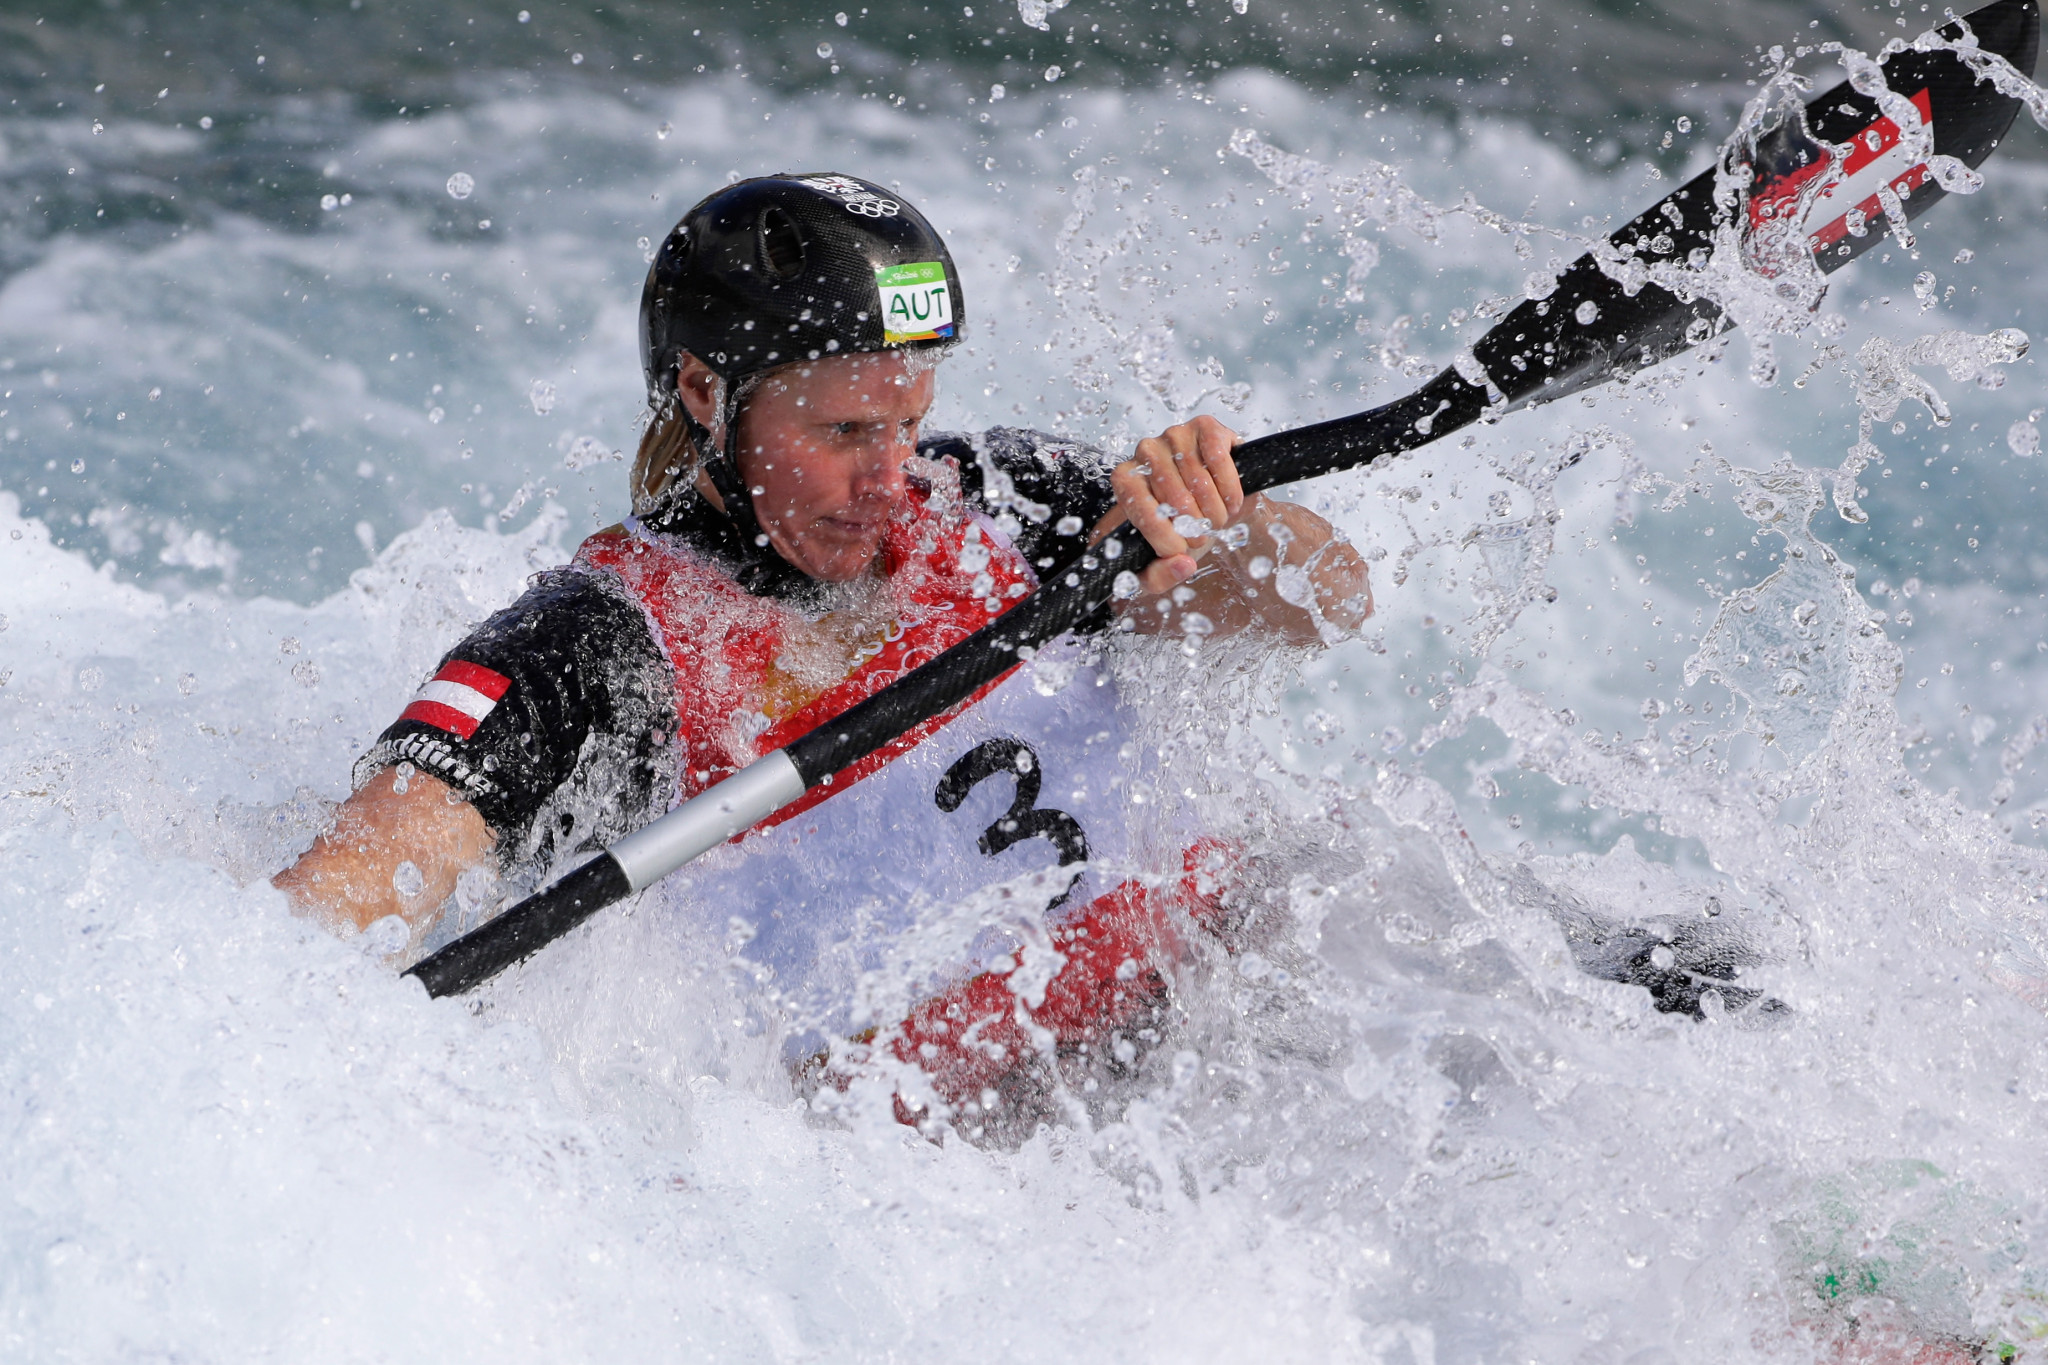 Austria’s Corinna Kuhnle was among the qualifiers in the women's K1 event ©Getty Images